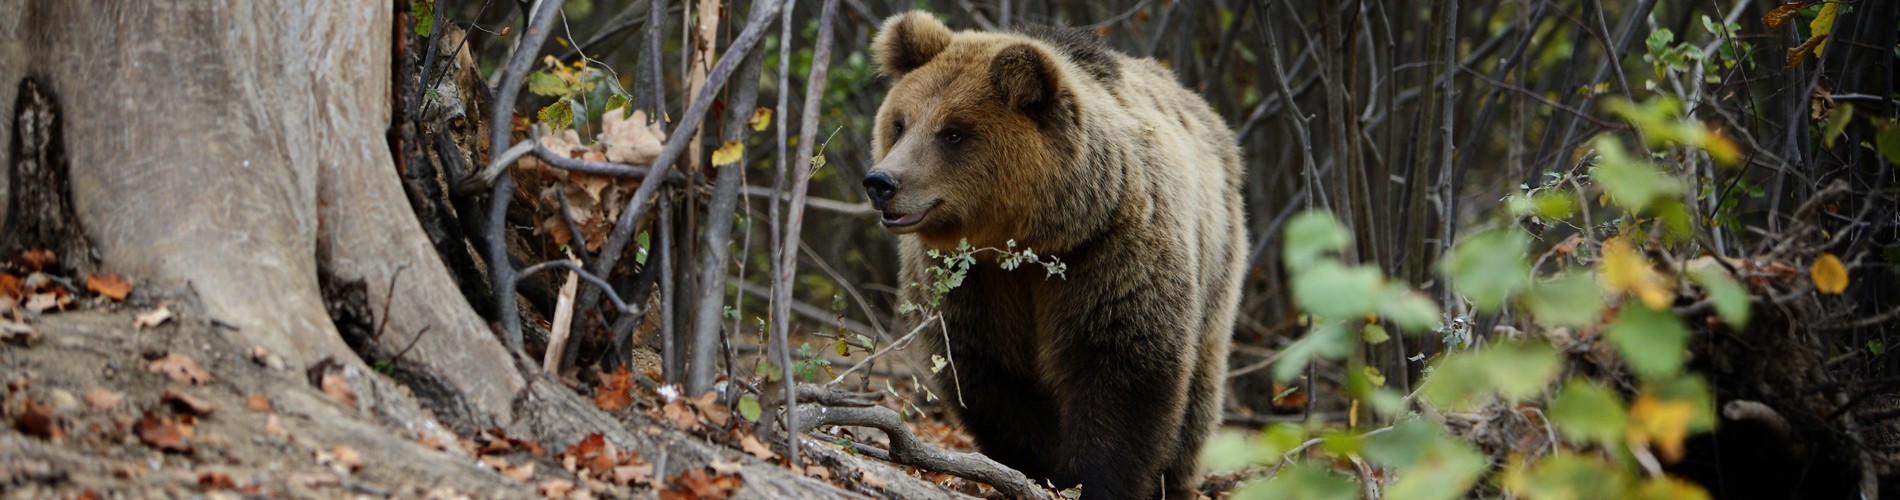 A large brown bear walking through a forest of greenery